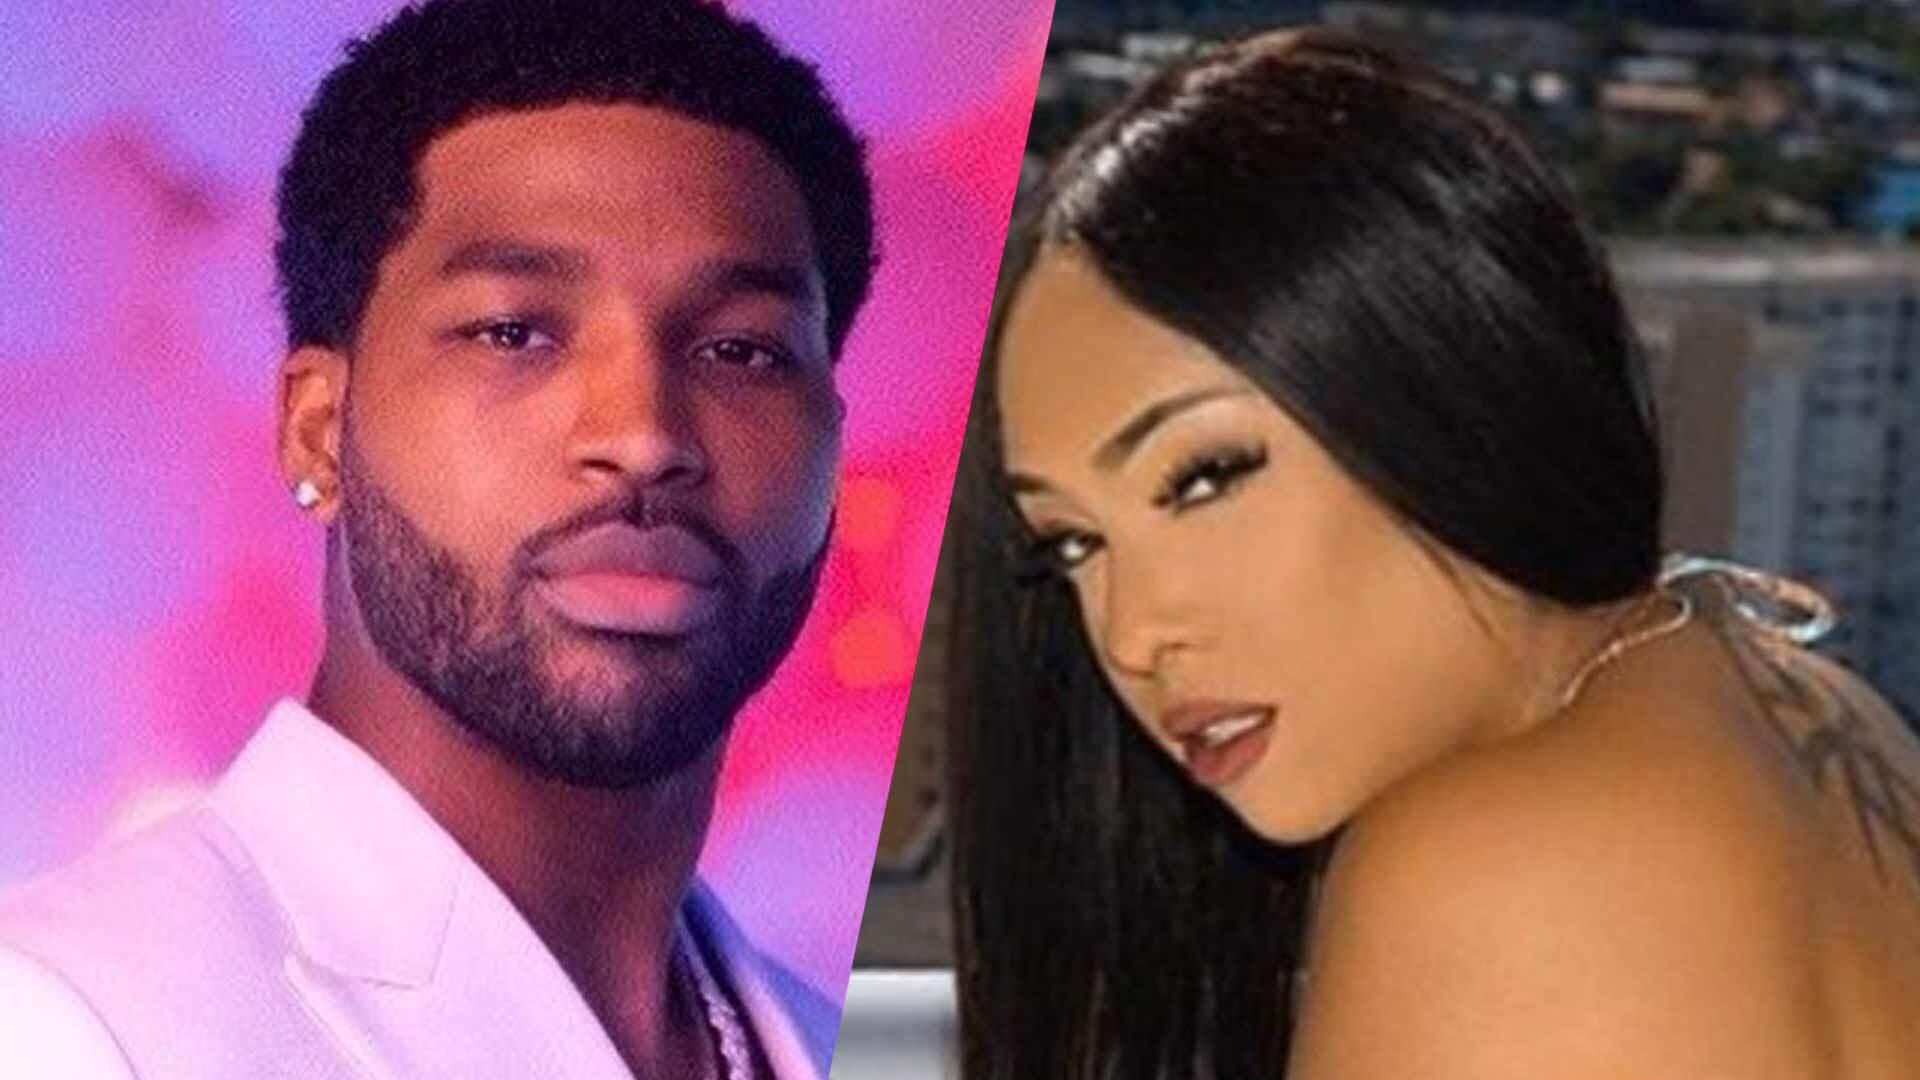 Khloe Kardashian’s BF Tristan Thompson Slaps Alleged Baby Mama With Legal Papers